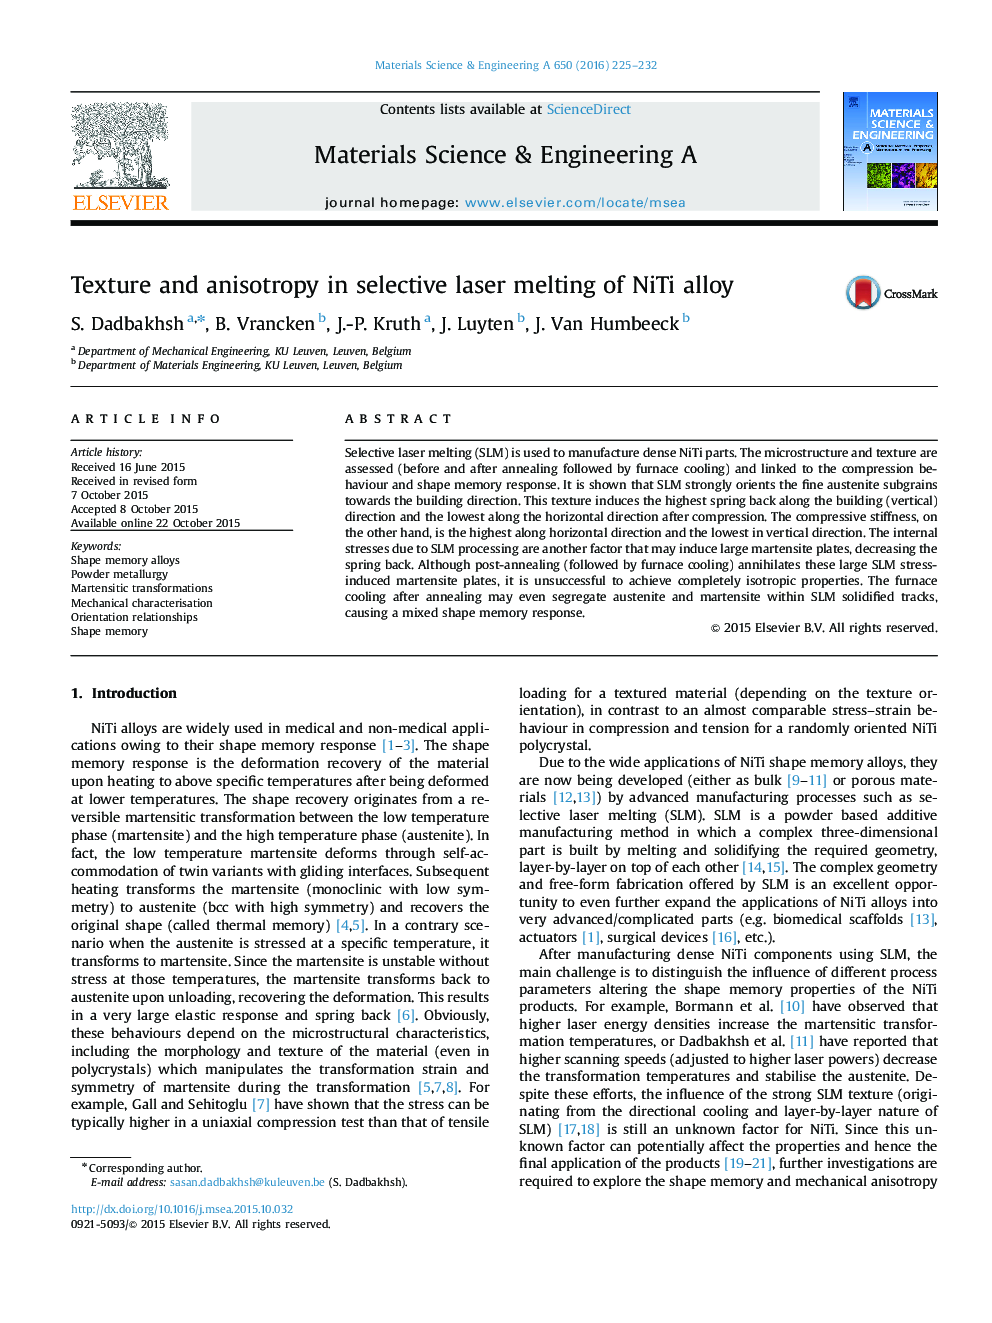 Texture and anisotropy in selective laser melting of NiTi alloy